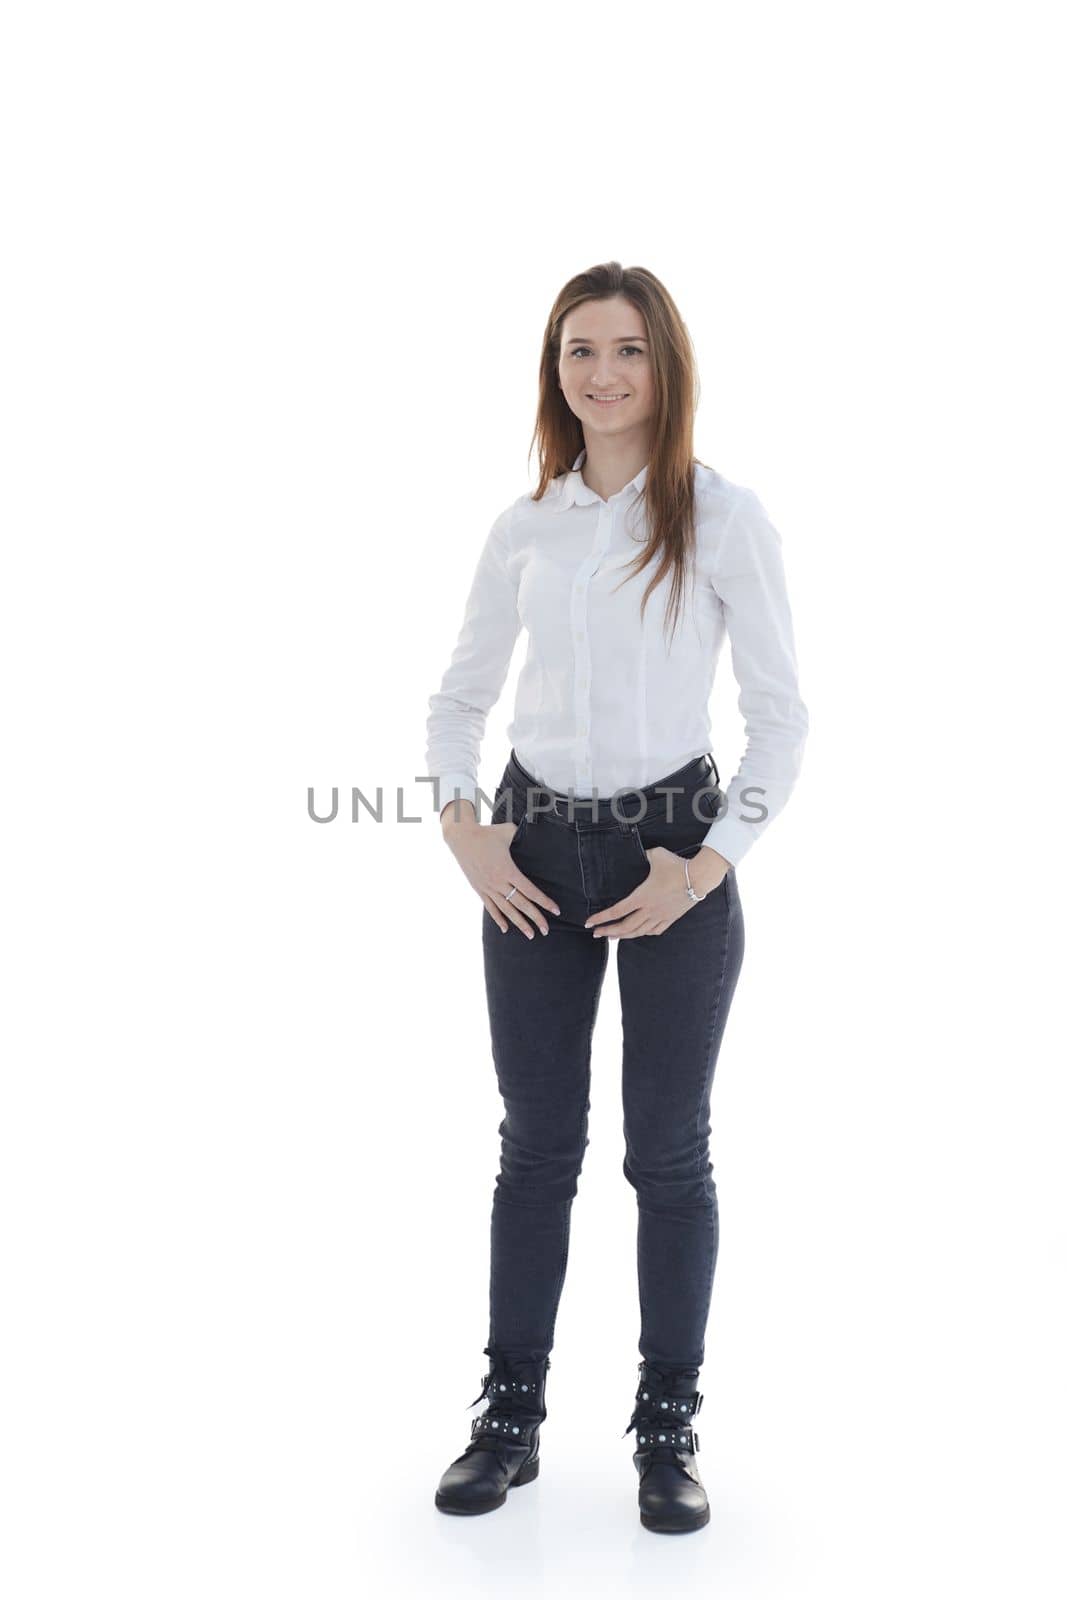 in full growth. attractive girl in jeans and a white blouse . by asdf